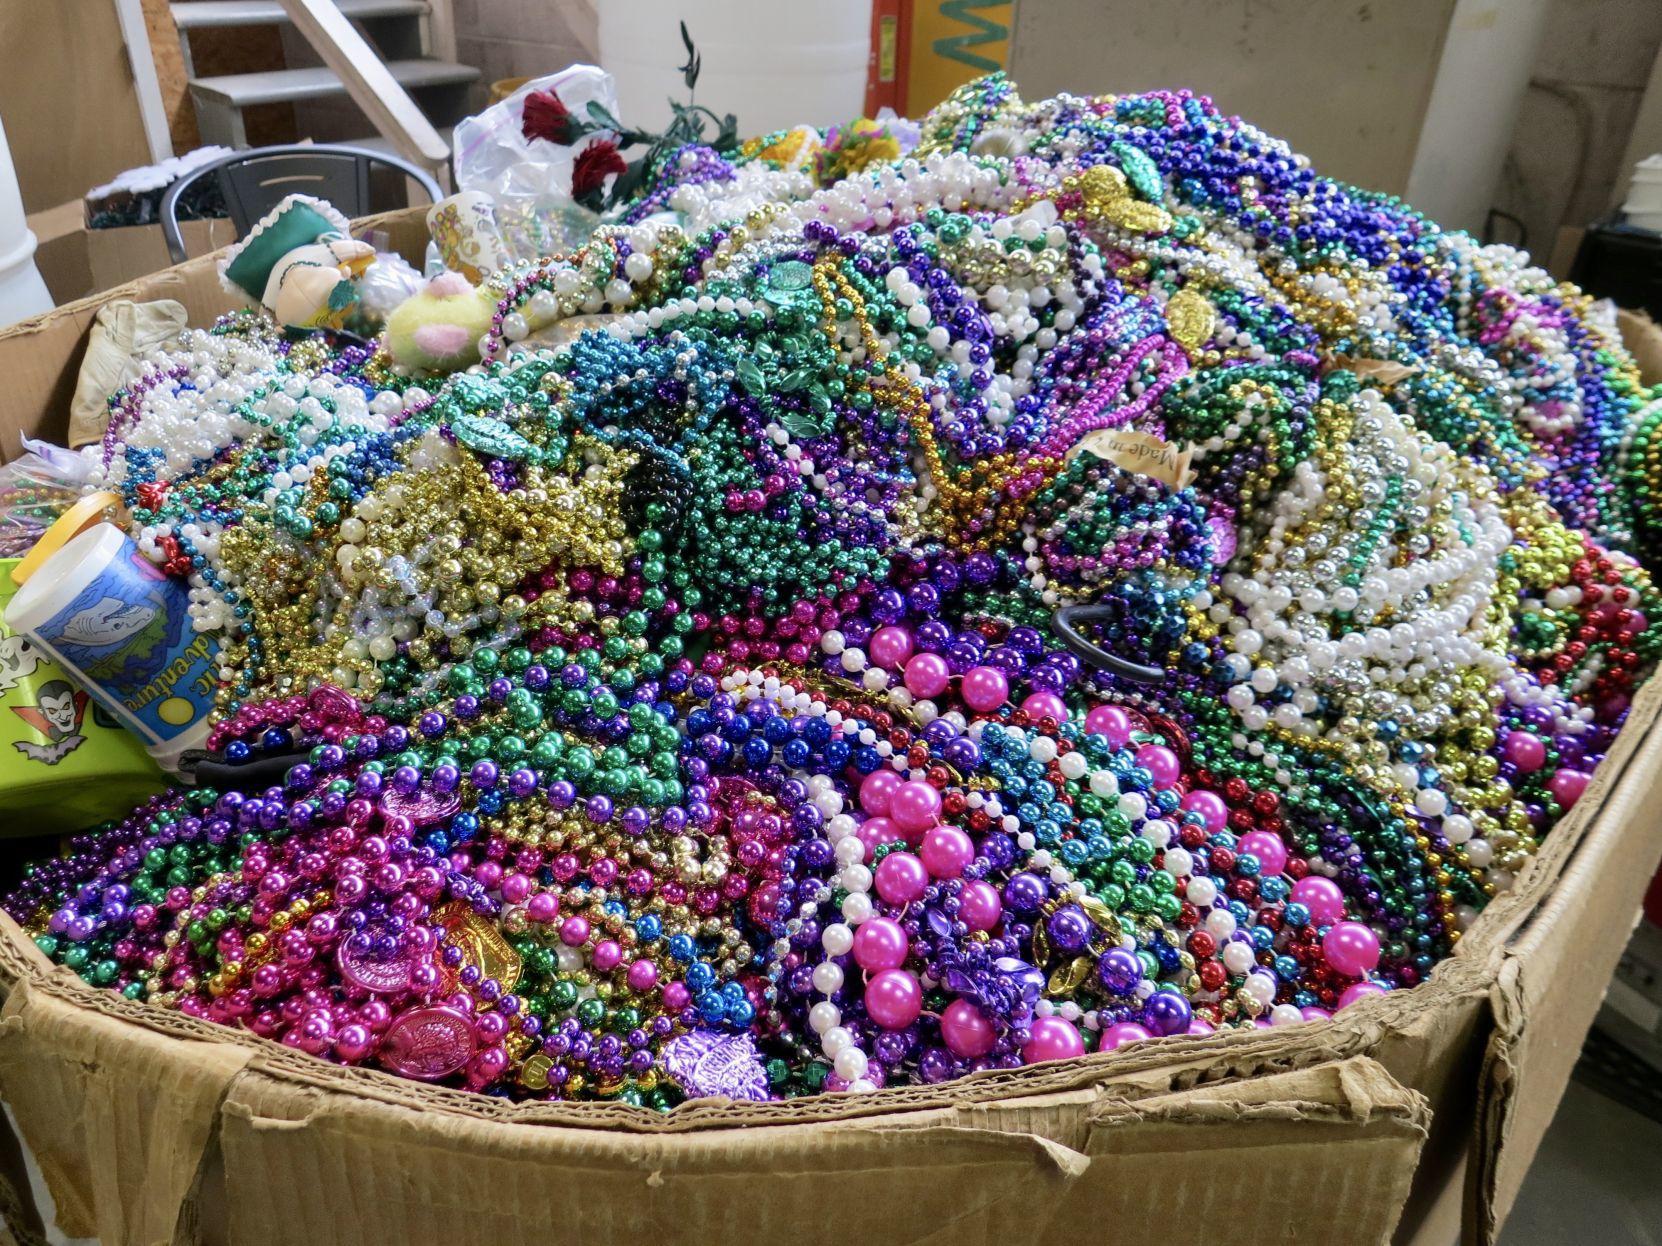 Bead overload? These worthy causes take Mardi Gras throws to reuse